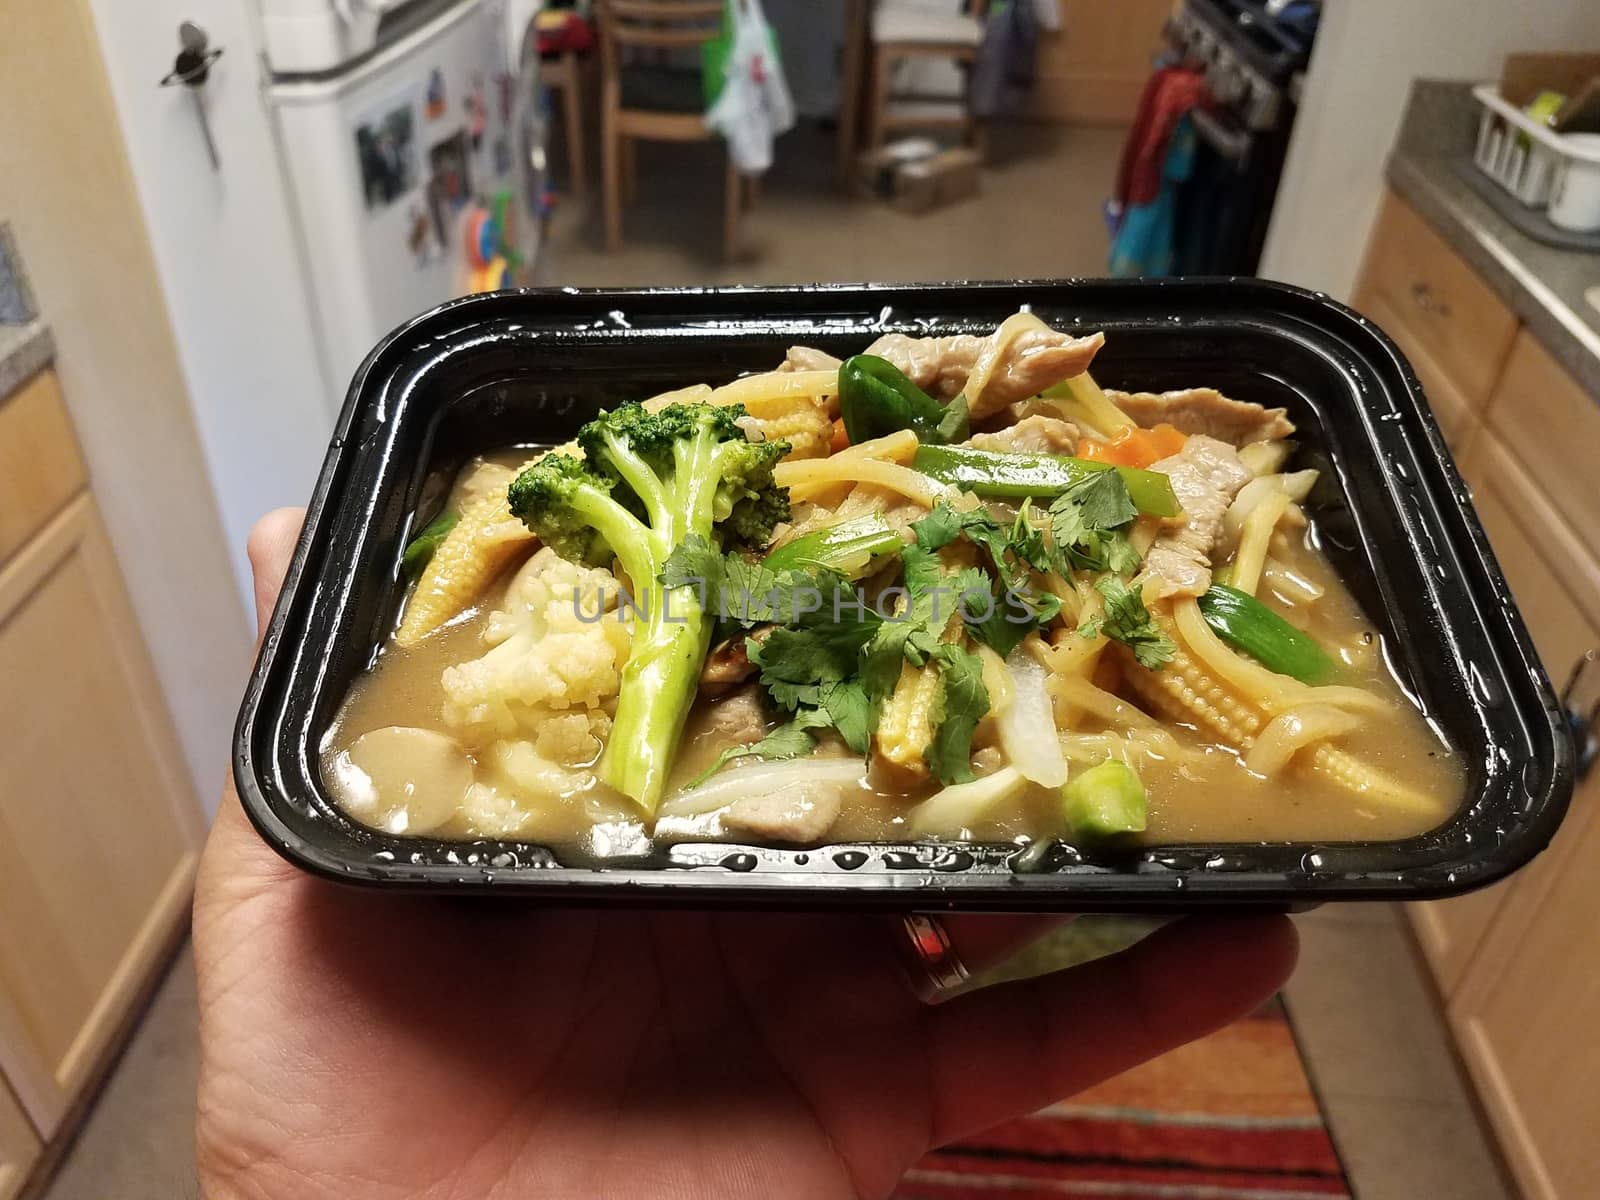 hand holding Thai food with curry broccoli bamboo and pork and corn